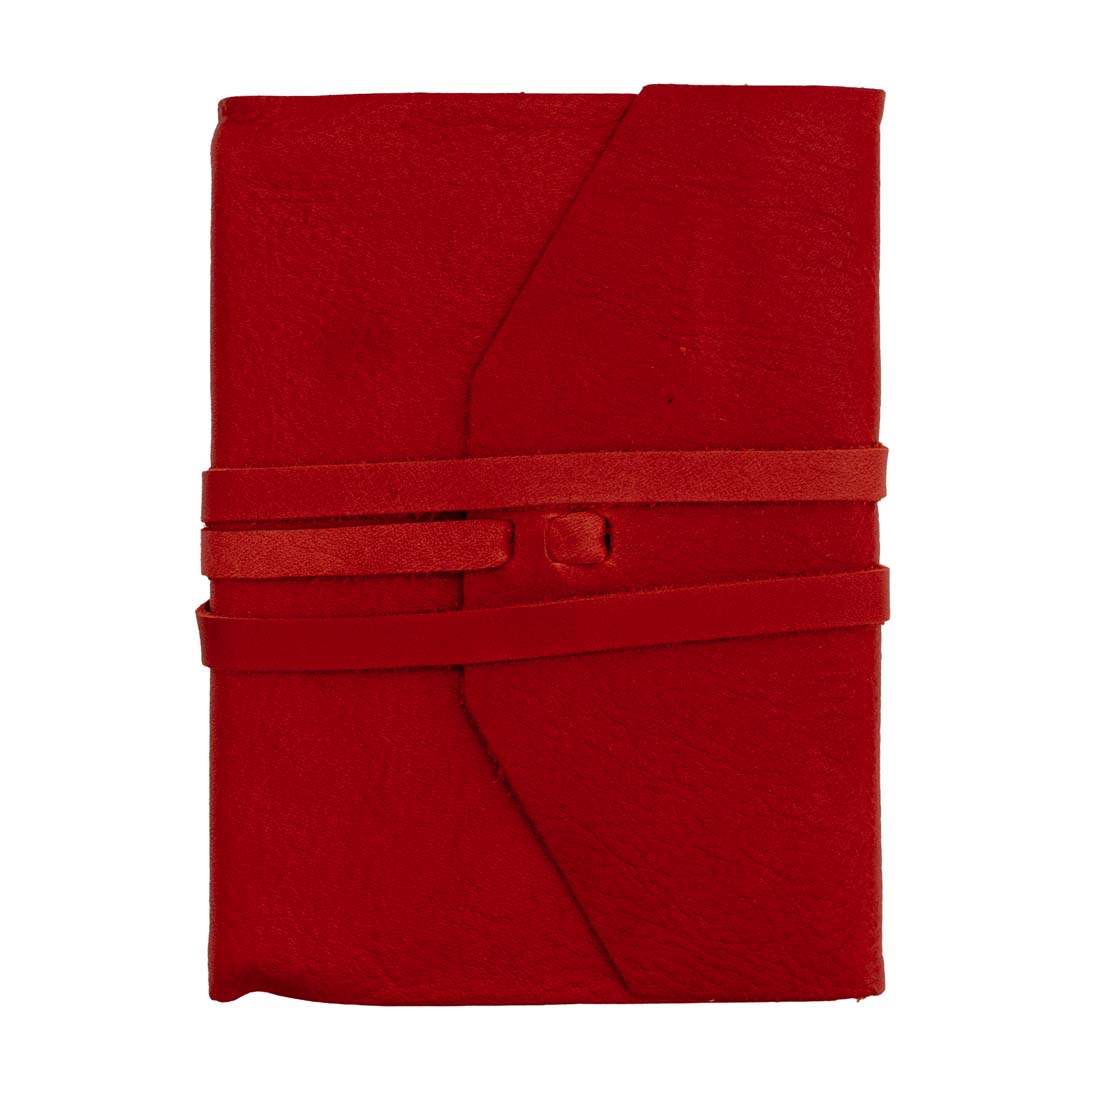 Red Leather Wrap Journal